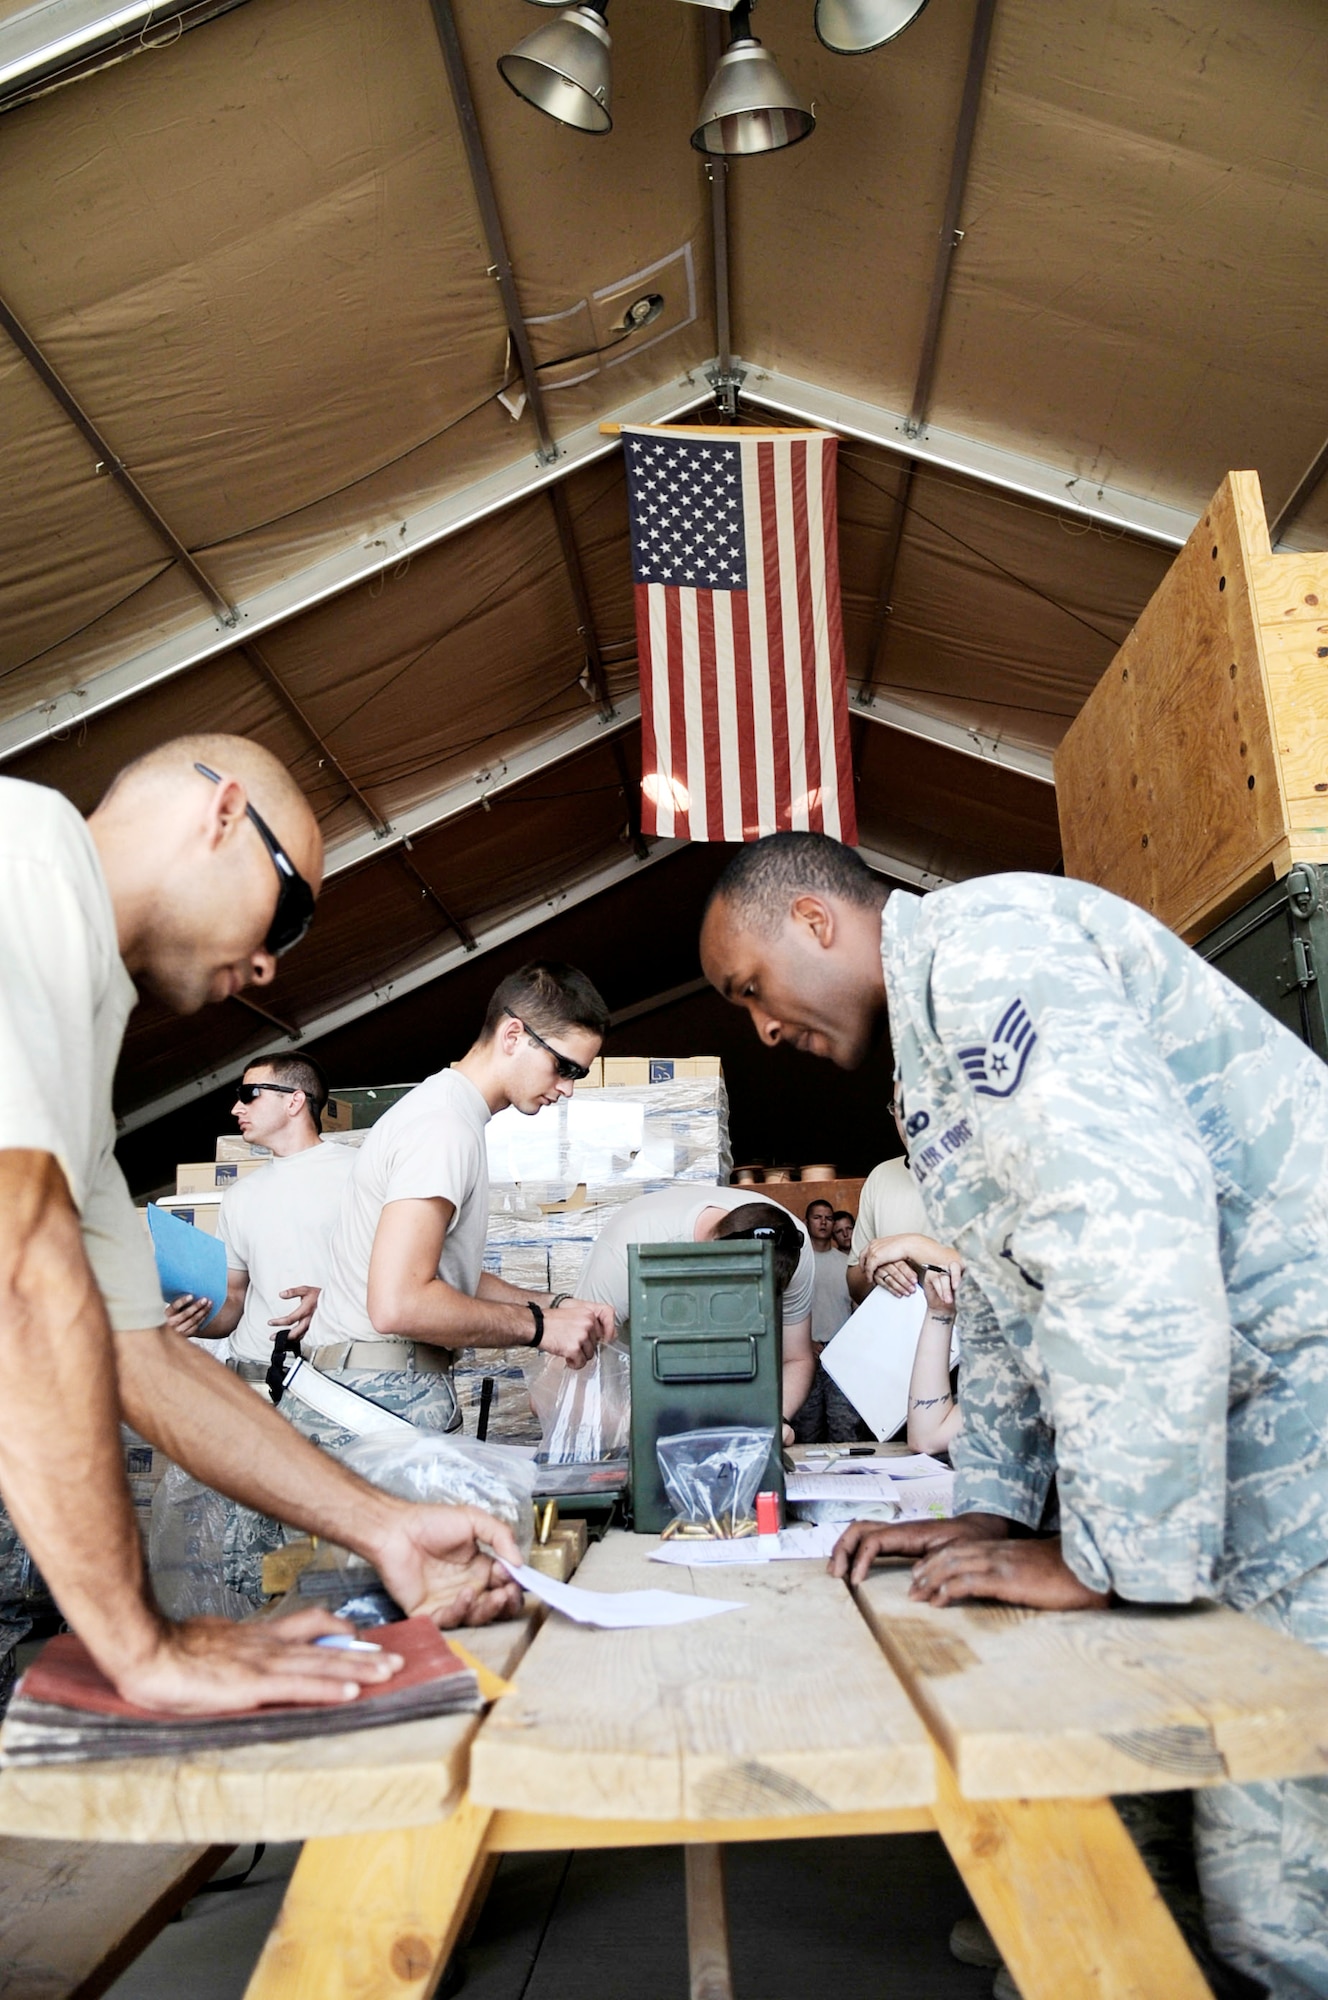 Staff Sgt. Chanson Johnson reviews a hand receipt to ensure redeploying members of the 451st Expeditionary Aircraft Maintenance Squadron have properly listed all items being turned in April 16, 2010, at Kandahar Airfield, Afghanistan. Sergeant Johnson is the 451st Expeditionary Security Forces Squadron combat arms NCO in charge. (U.S. Air Force photo/Senior Airman Nancy Hooks)